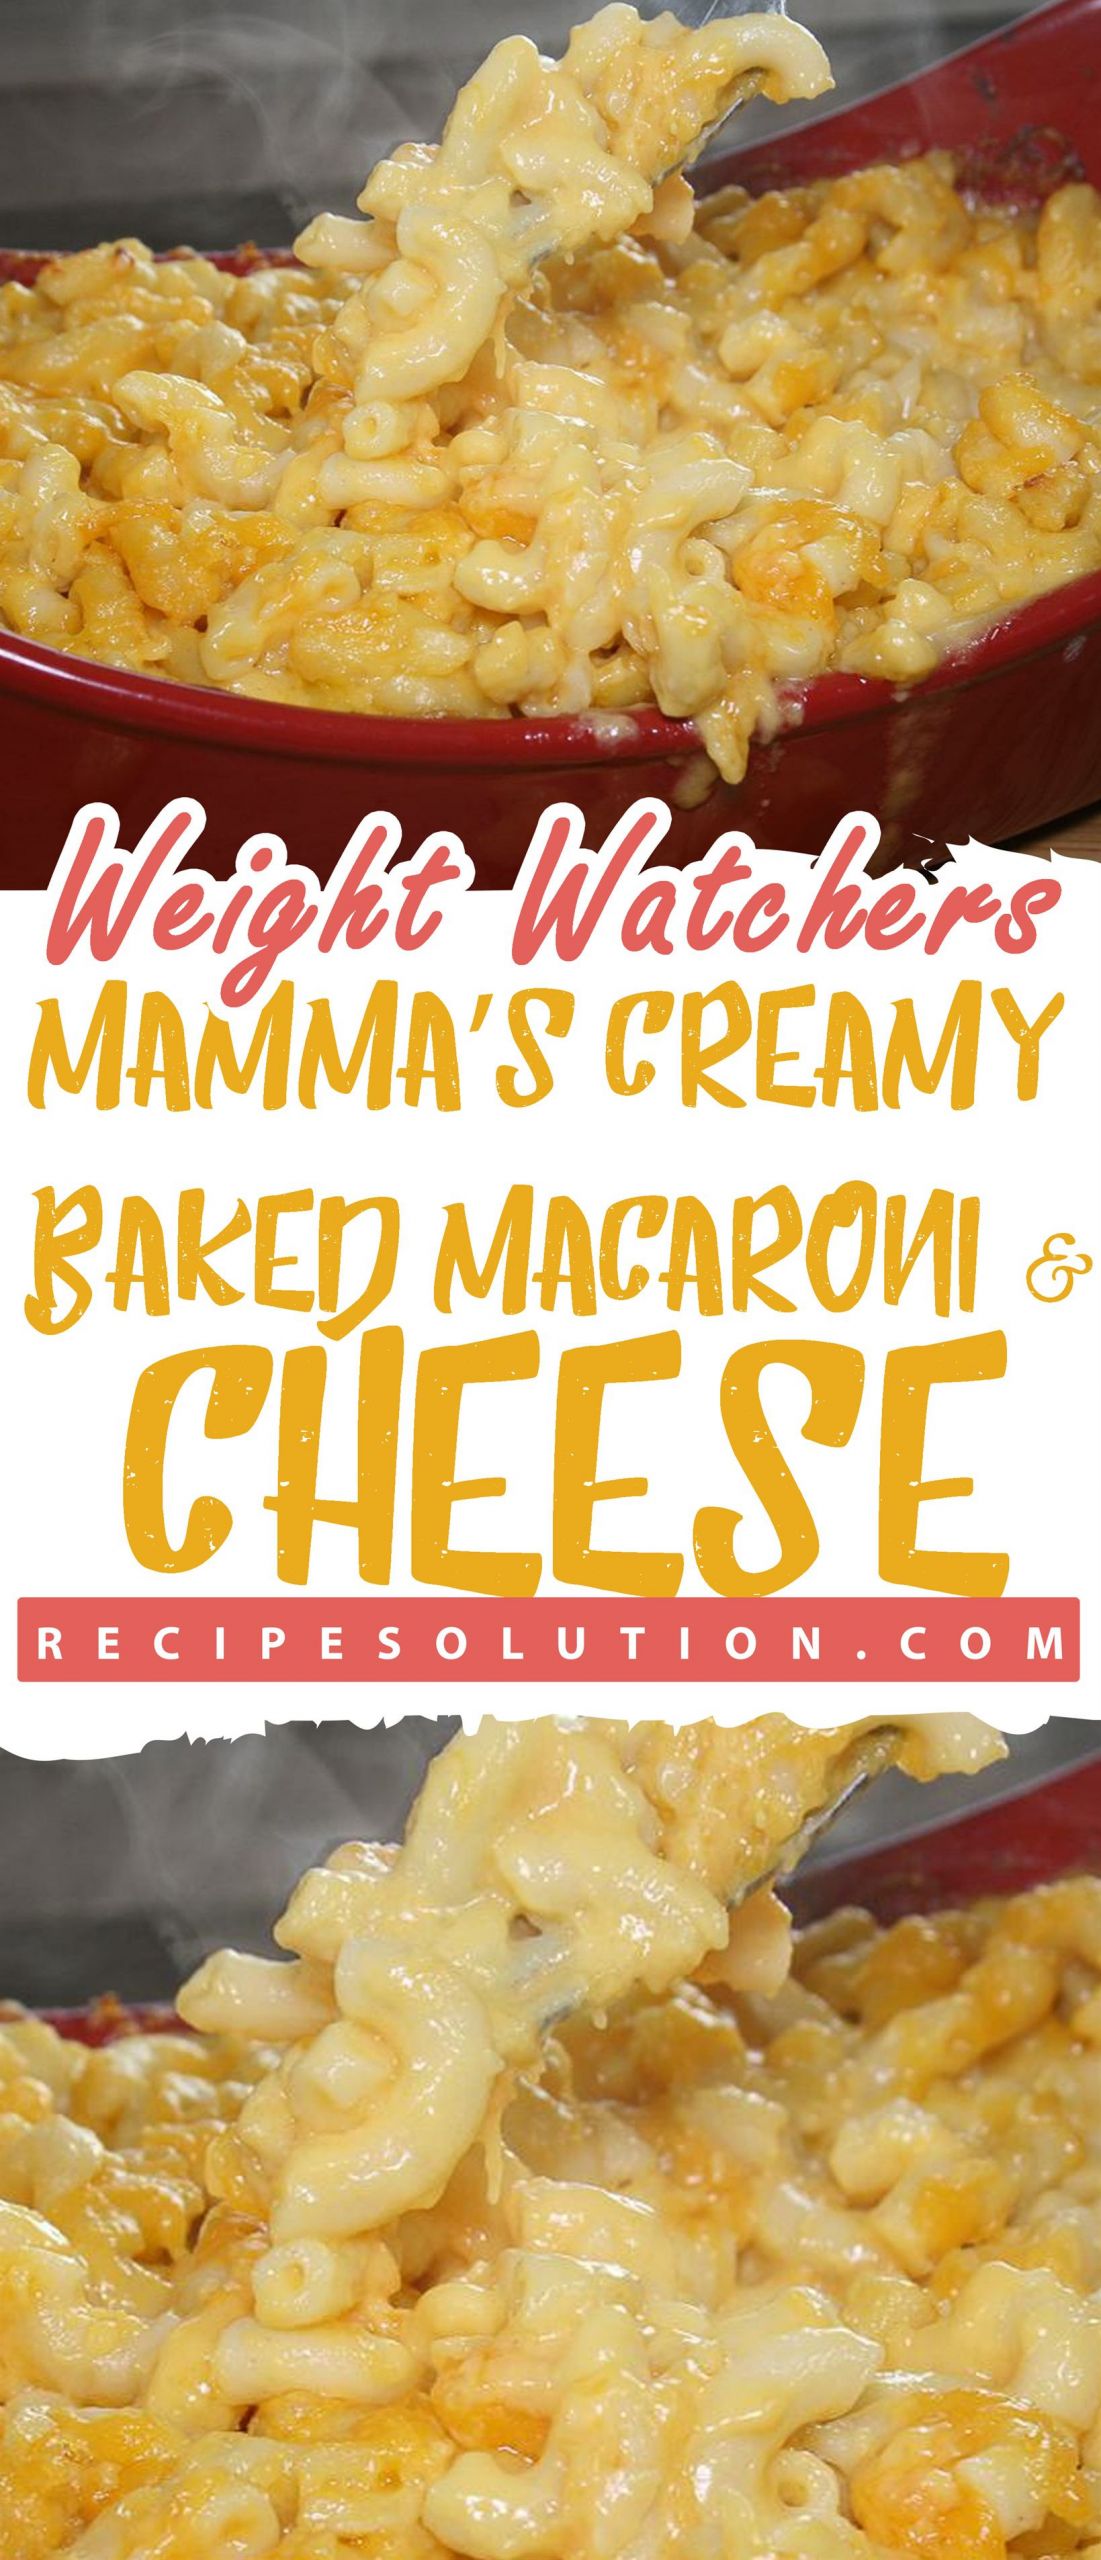 Weight Watchers Baked Macaroni And Cheese
 Weight Watchers Mamma’s Creamy Baked Macaroni & Cheese